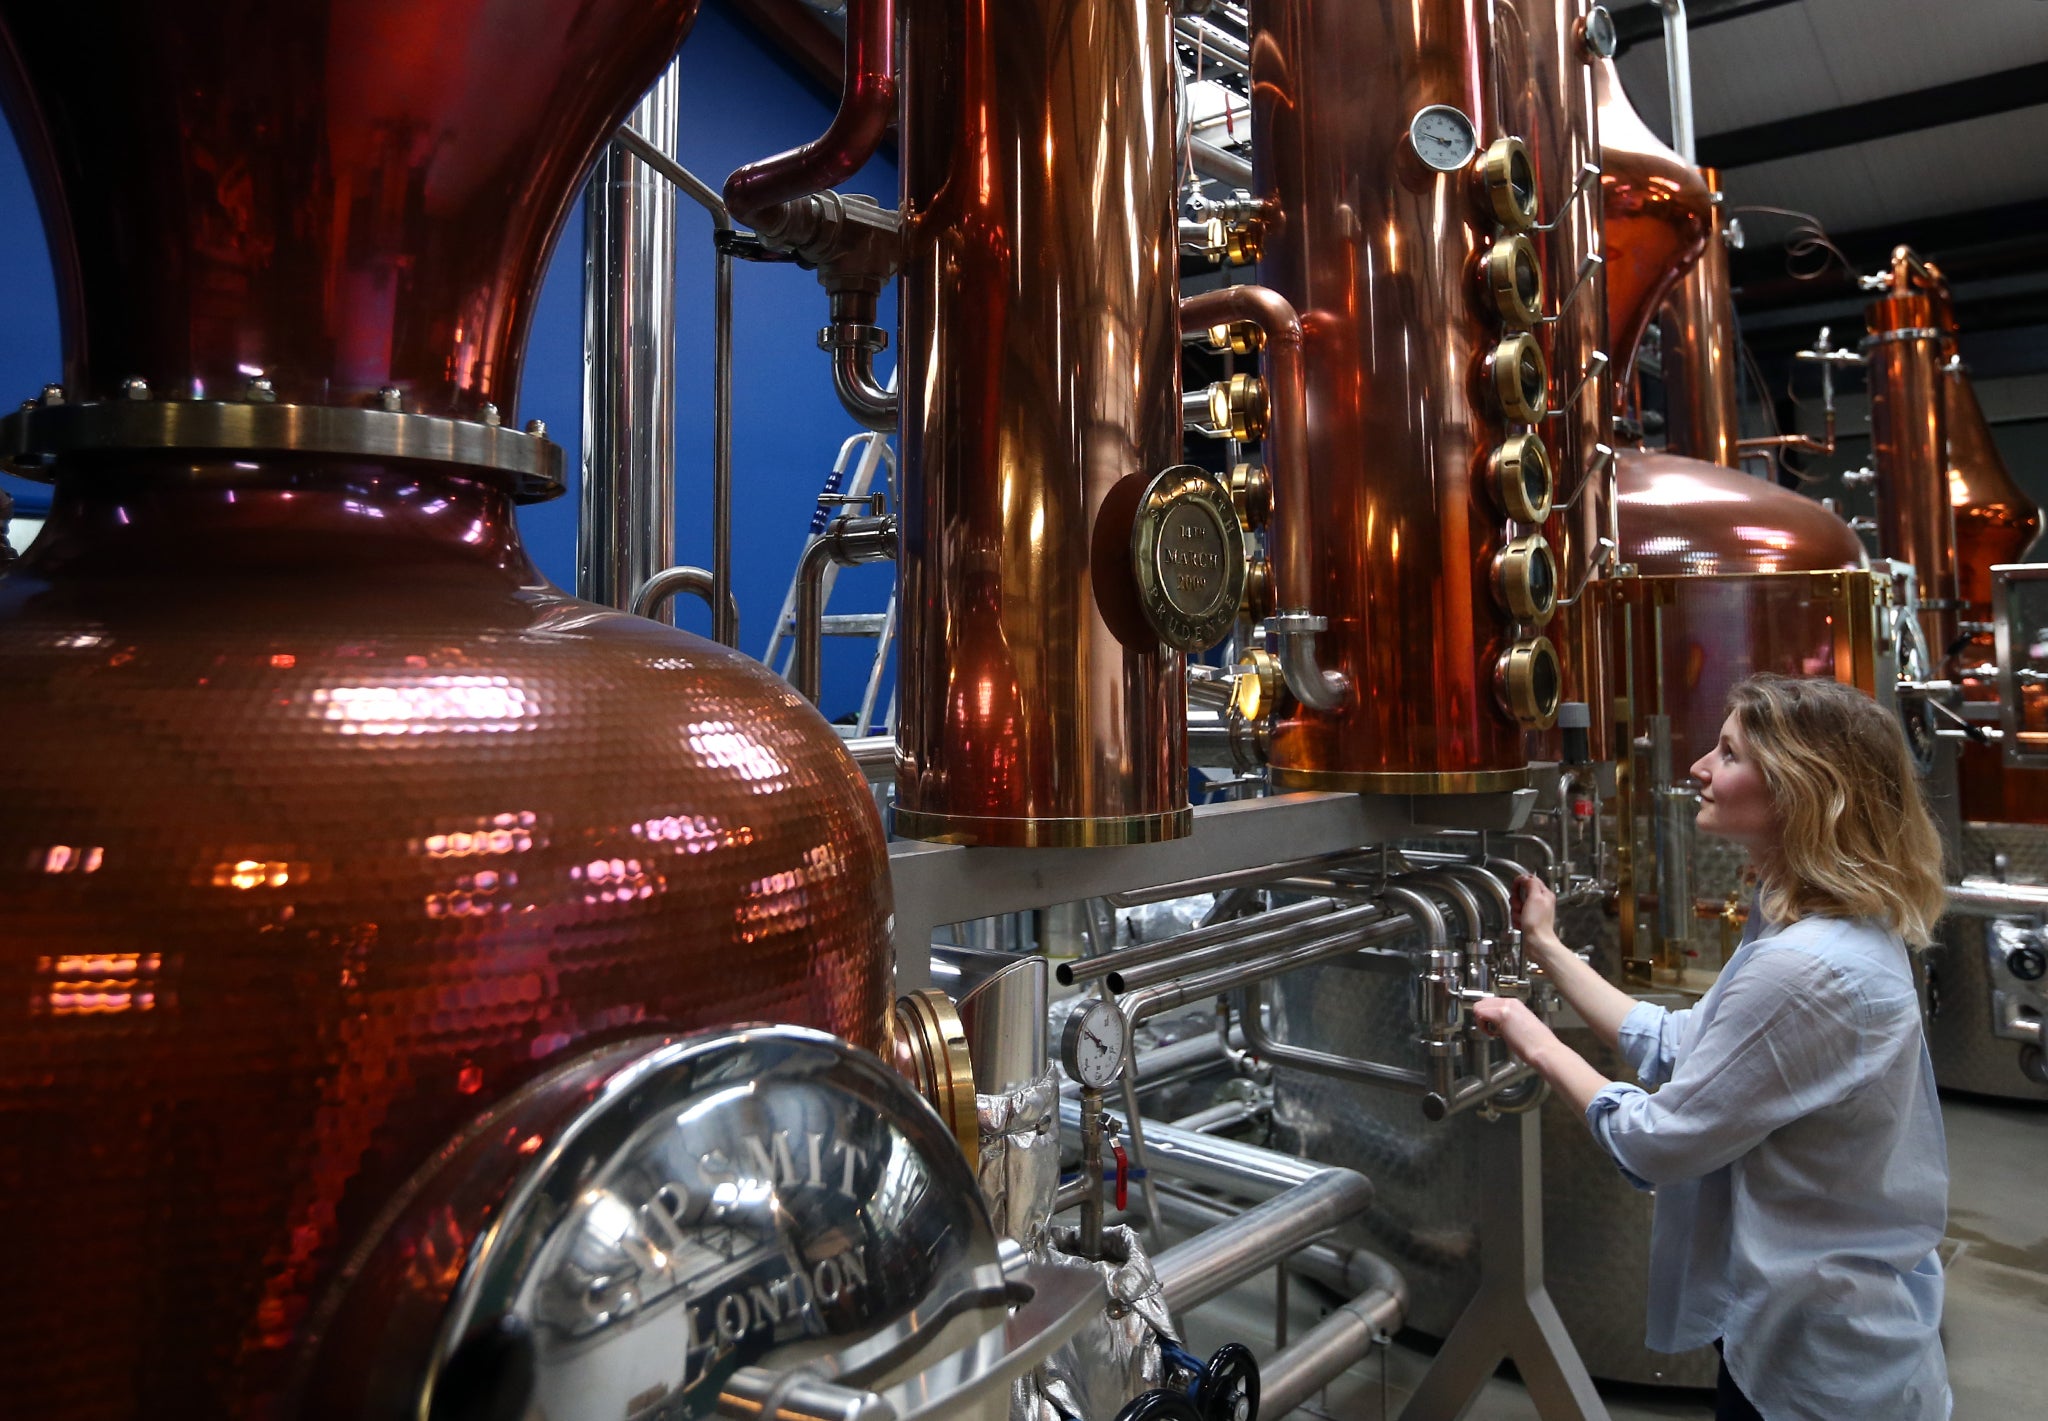 Sipmsith micro-distillery was the first to open in London in almost two centuries